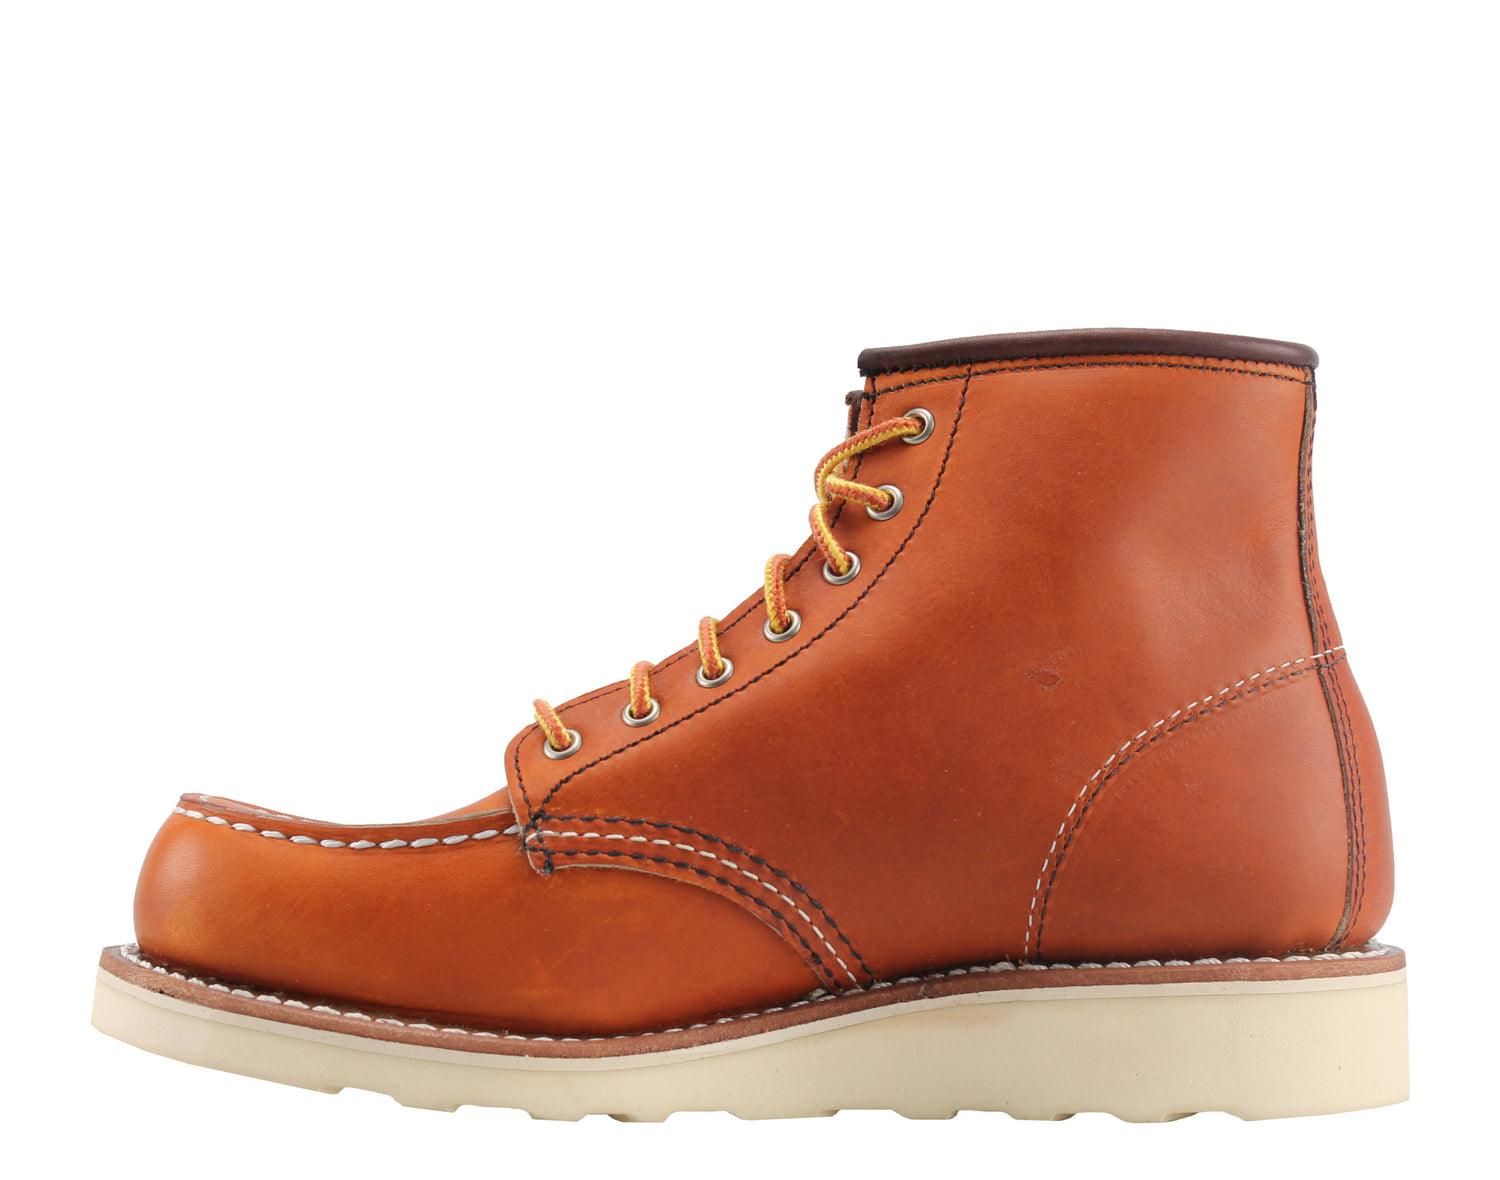 Red Wing Heritage 3375 6-Inch Moc Toe Women's Boots